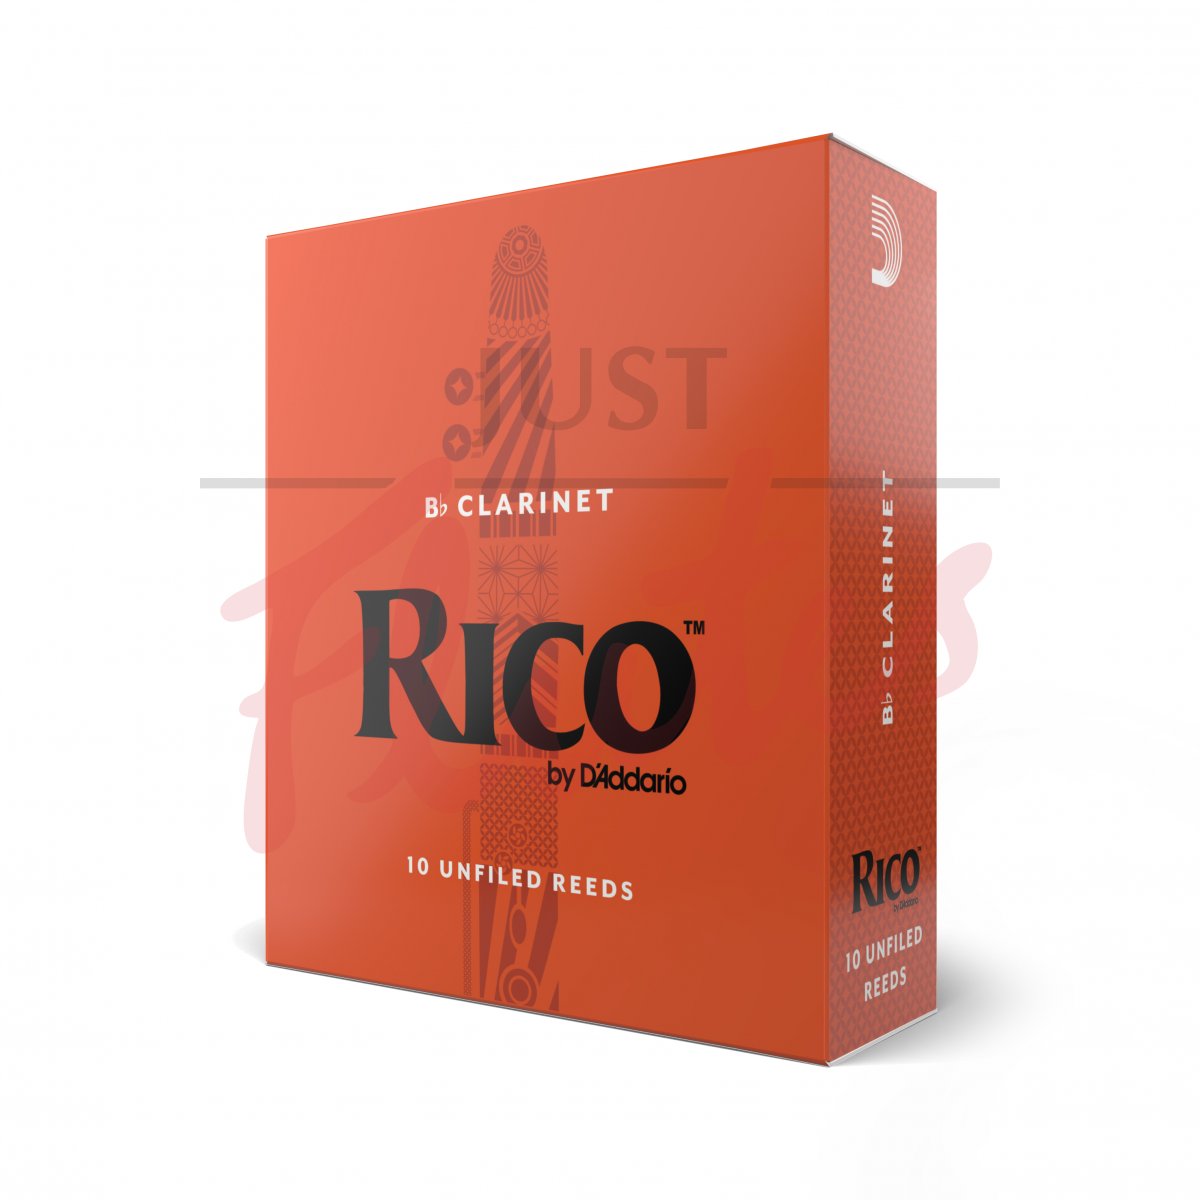 Rico by D'Addario RCA1035 Clarinet Reeds, 10-pack - Strength 3.5